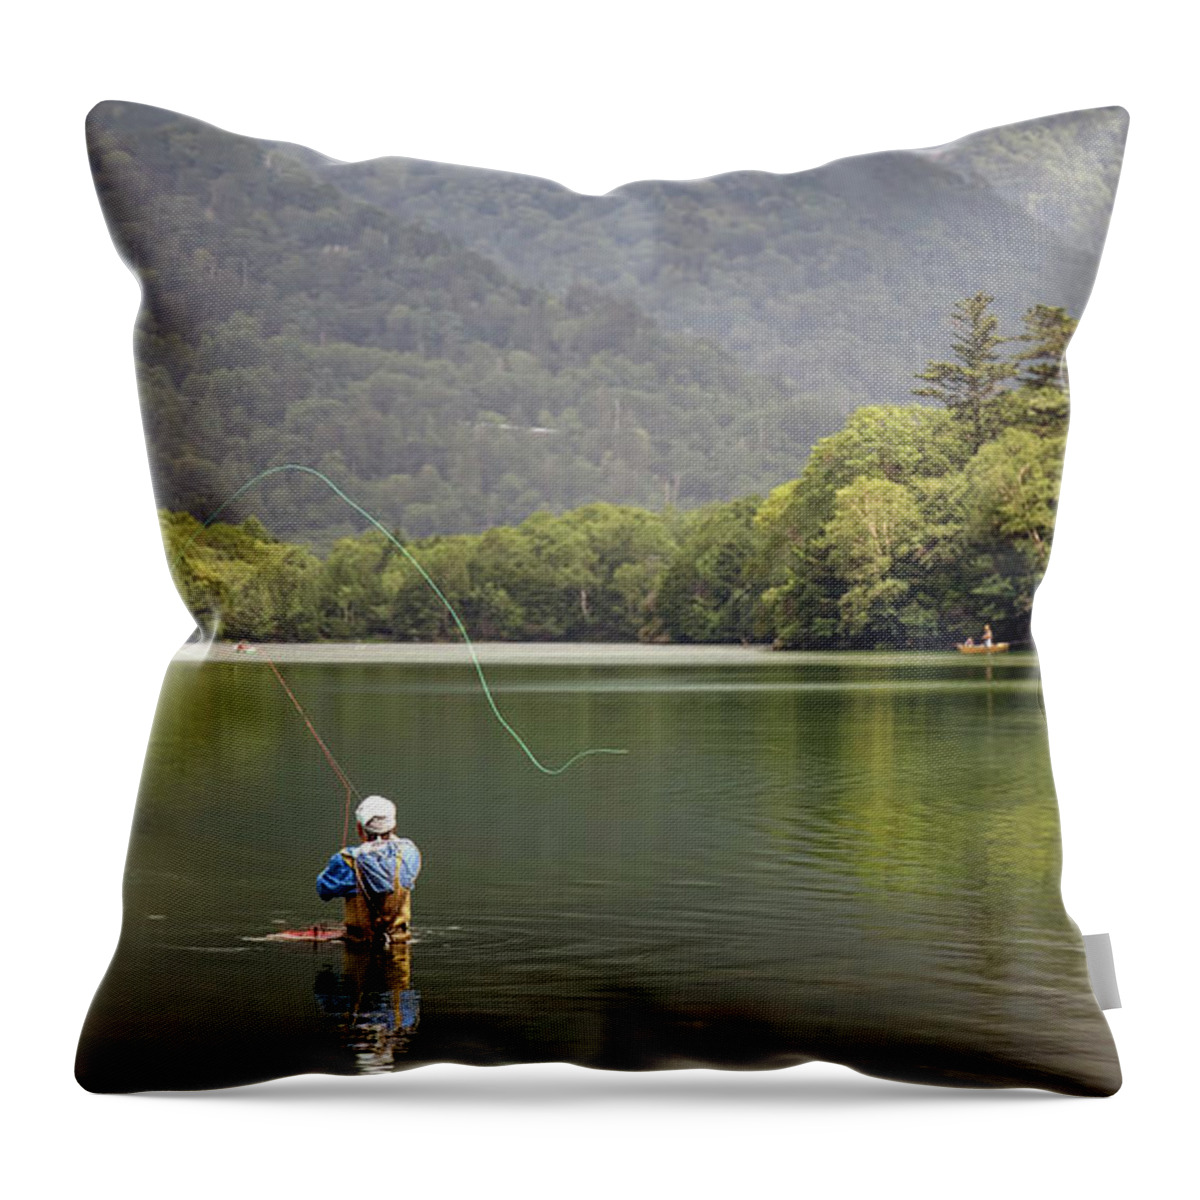 Asia Throw Pillow featuring the photograph Fly Fishing by Bill Chizek